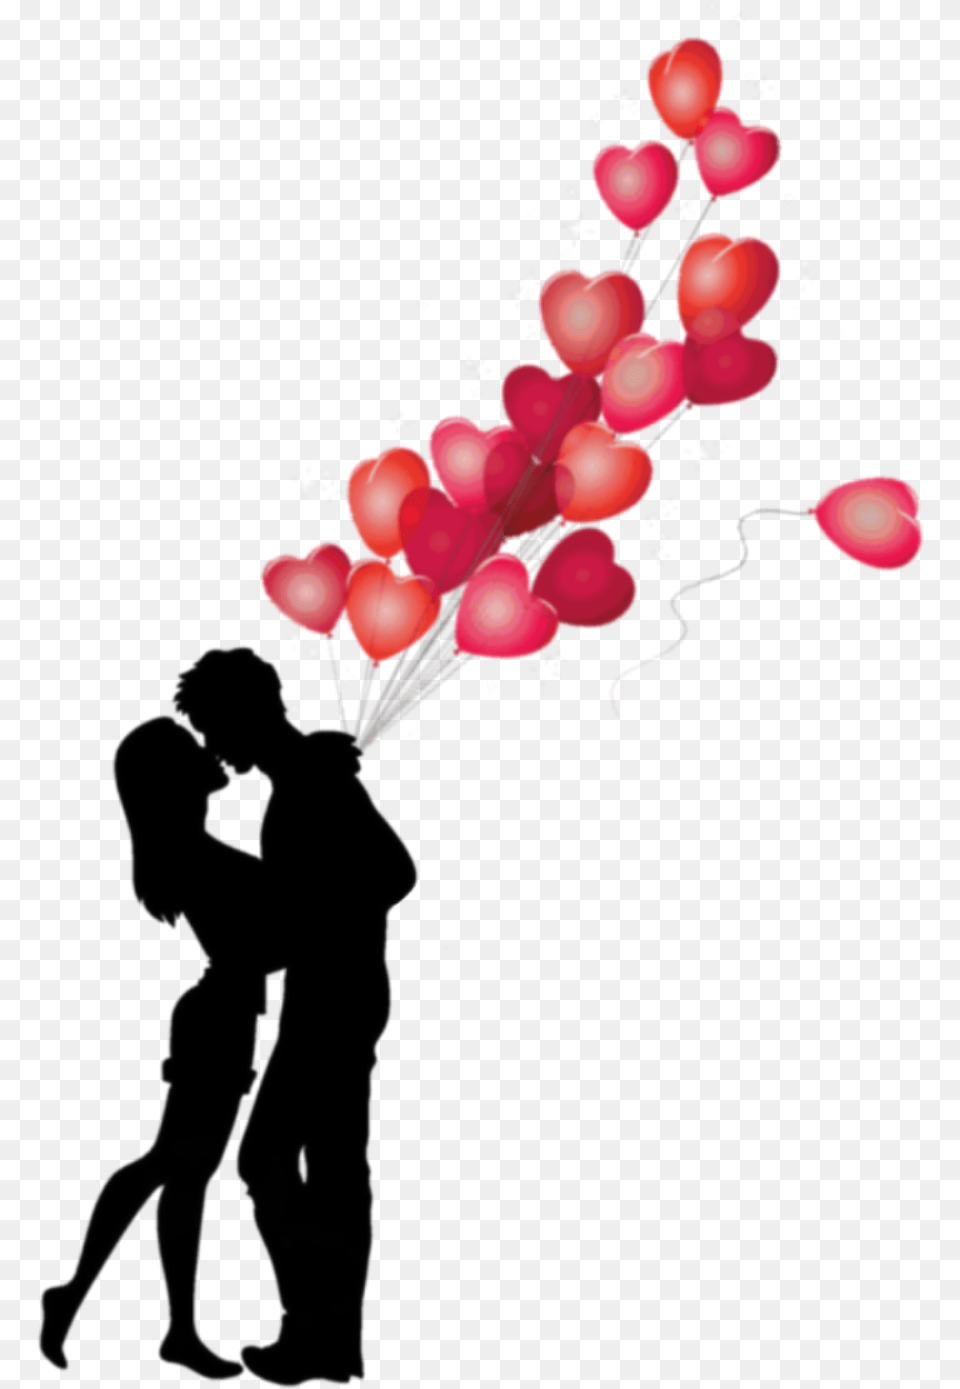 Love Hearts Silhouette Romantic Love Transparent, Art, Balloon, Graphics, Flower Free Png Download